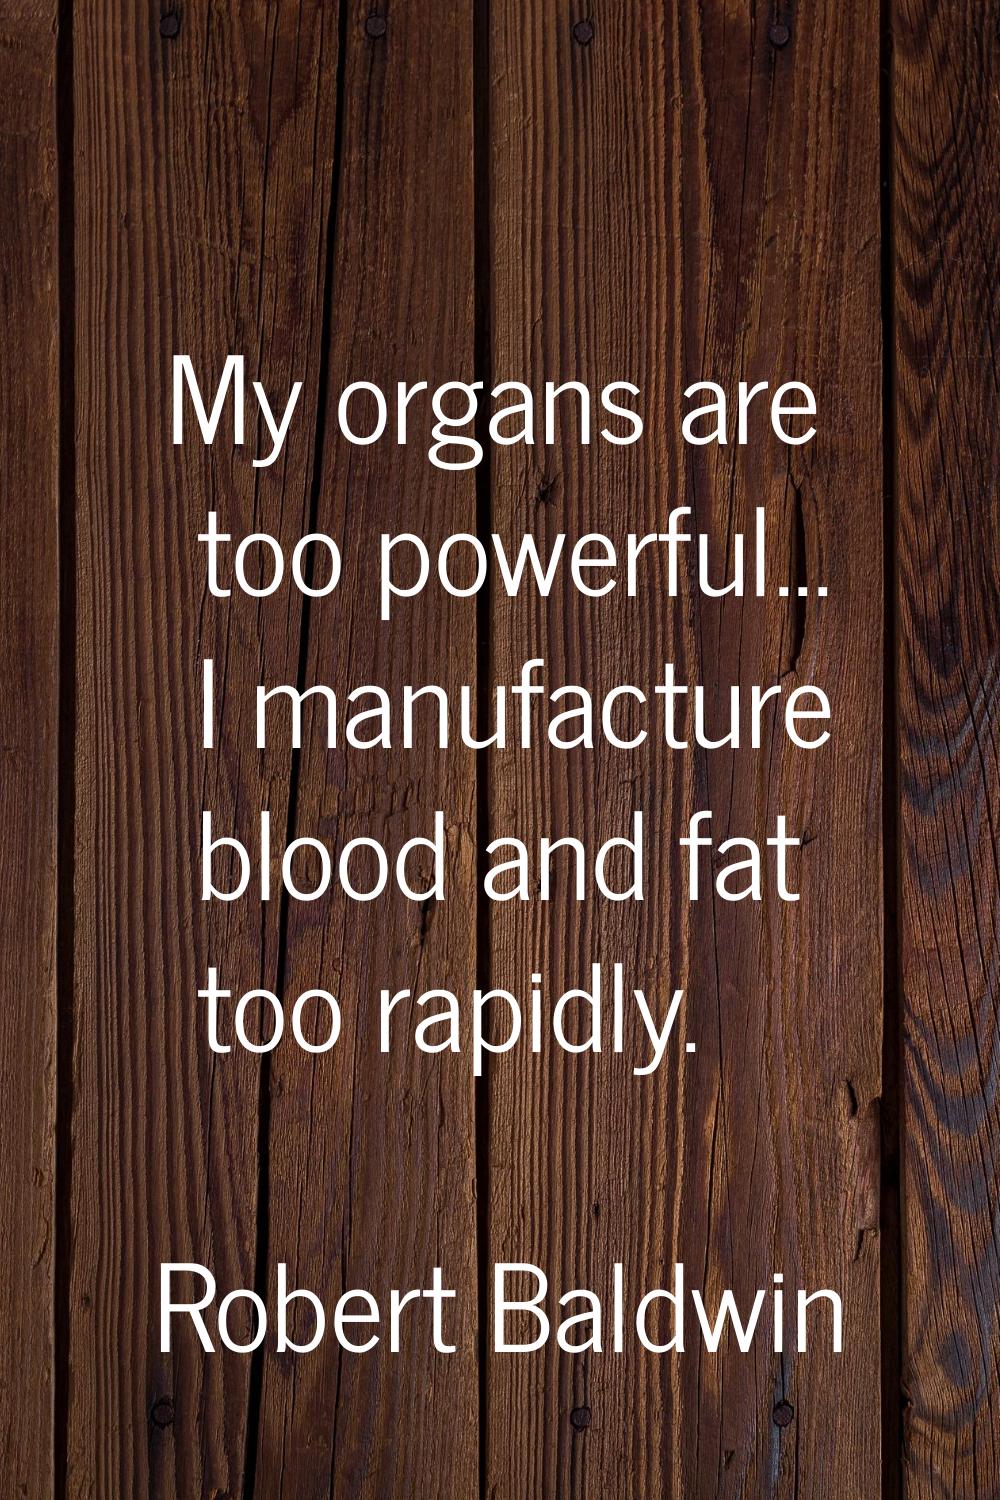 My organs are too powerful... I manufacture blood and fat too rapidly.